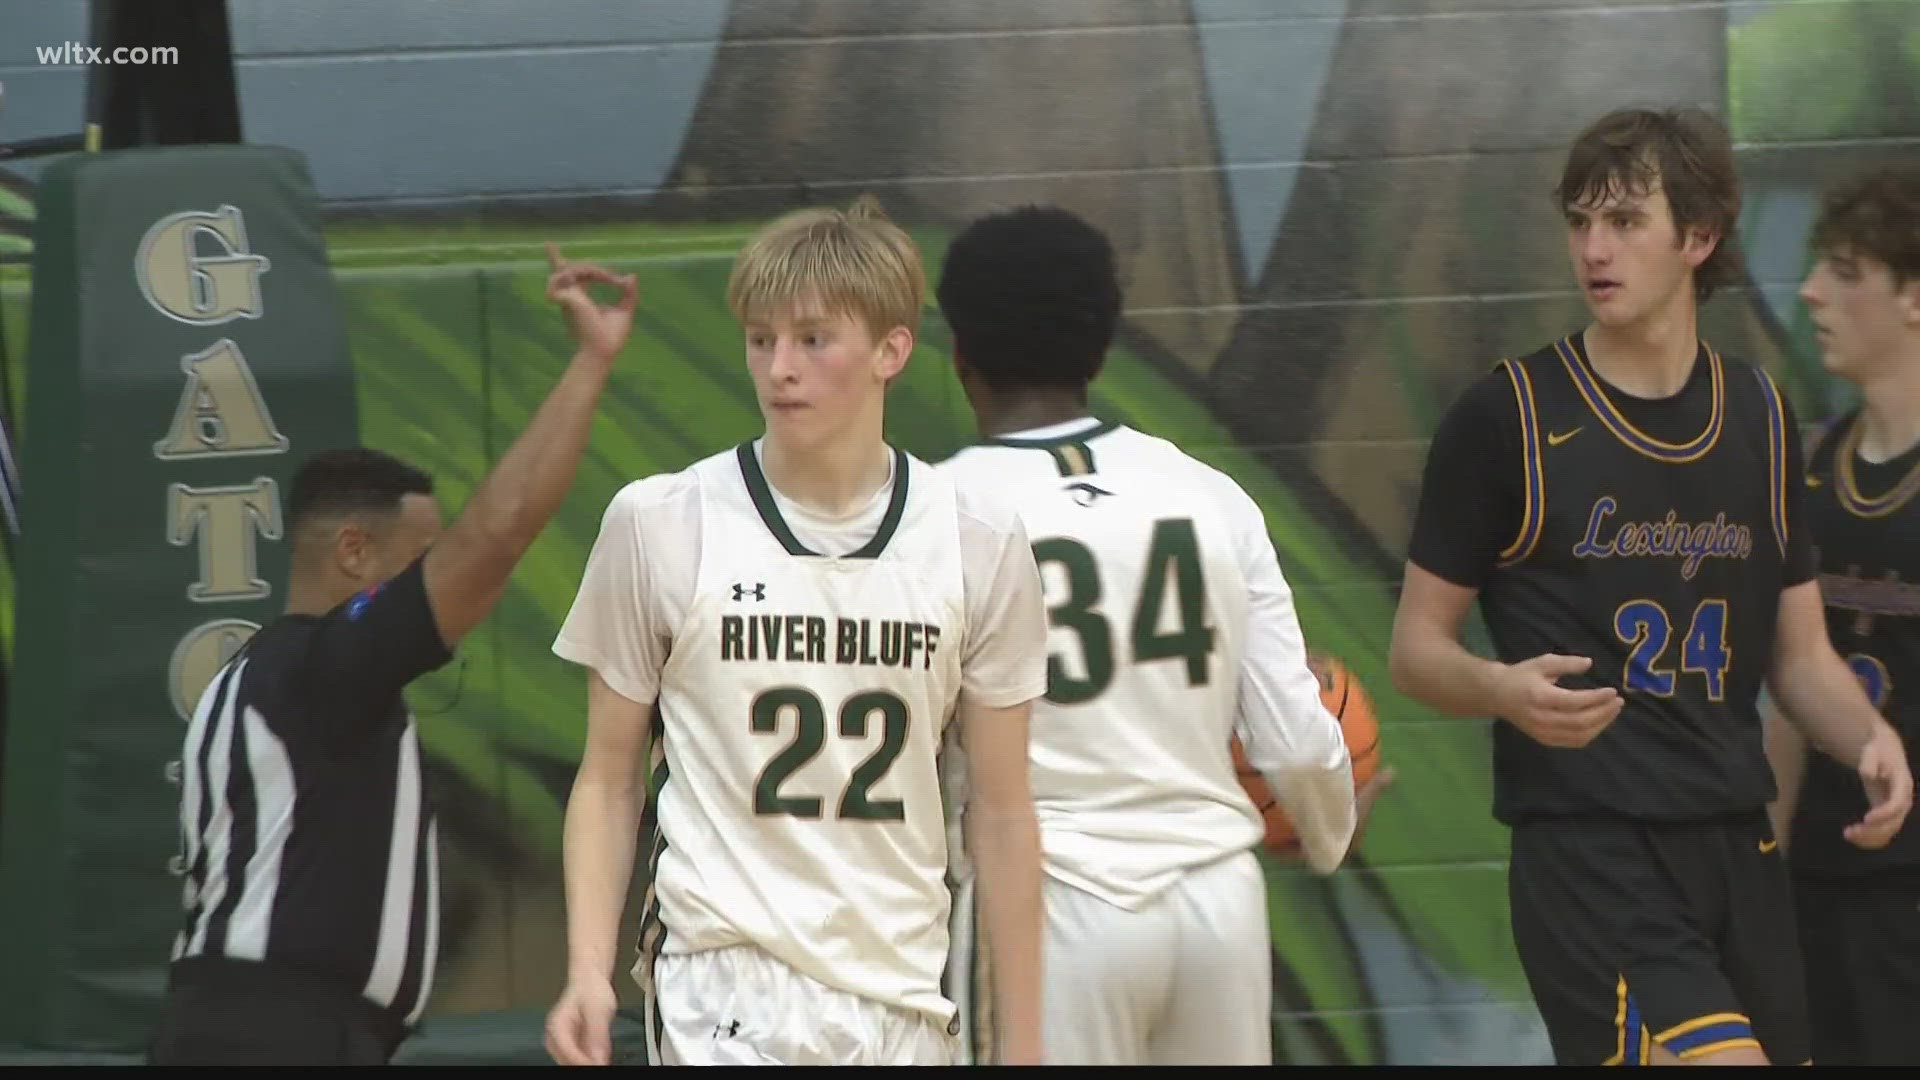 River Bluff forward Luke Chapman combines an outstanding intellect with keen instincts on the court, a powerful combination that is walking the halls at River Bluff